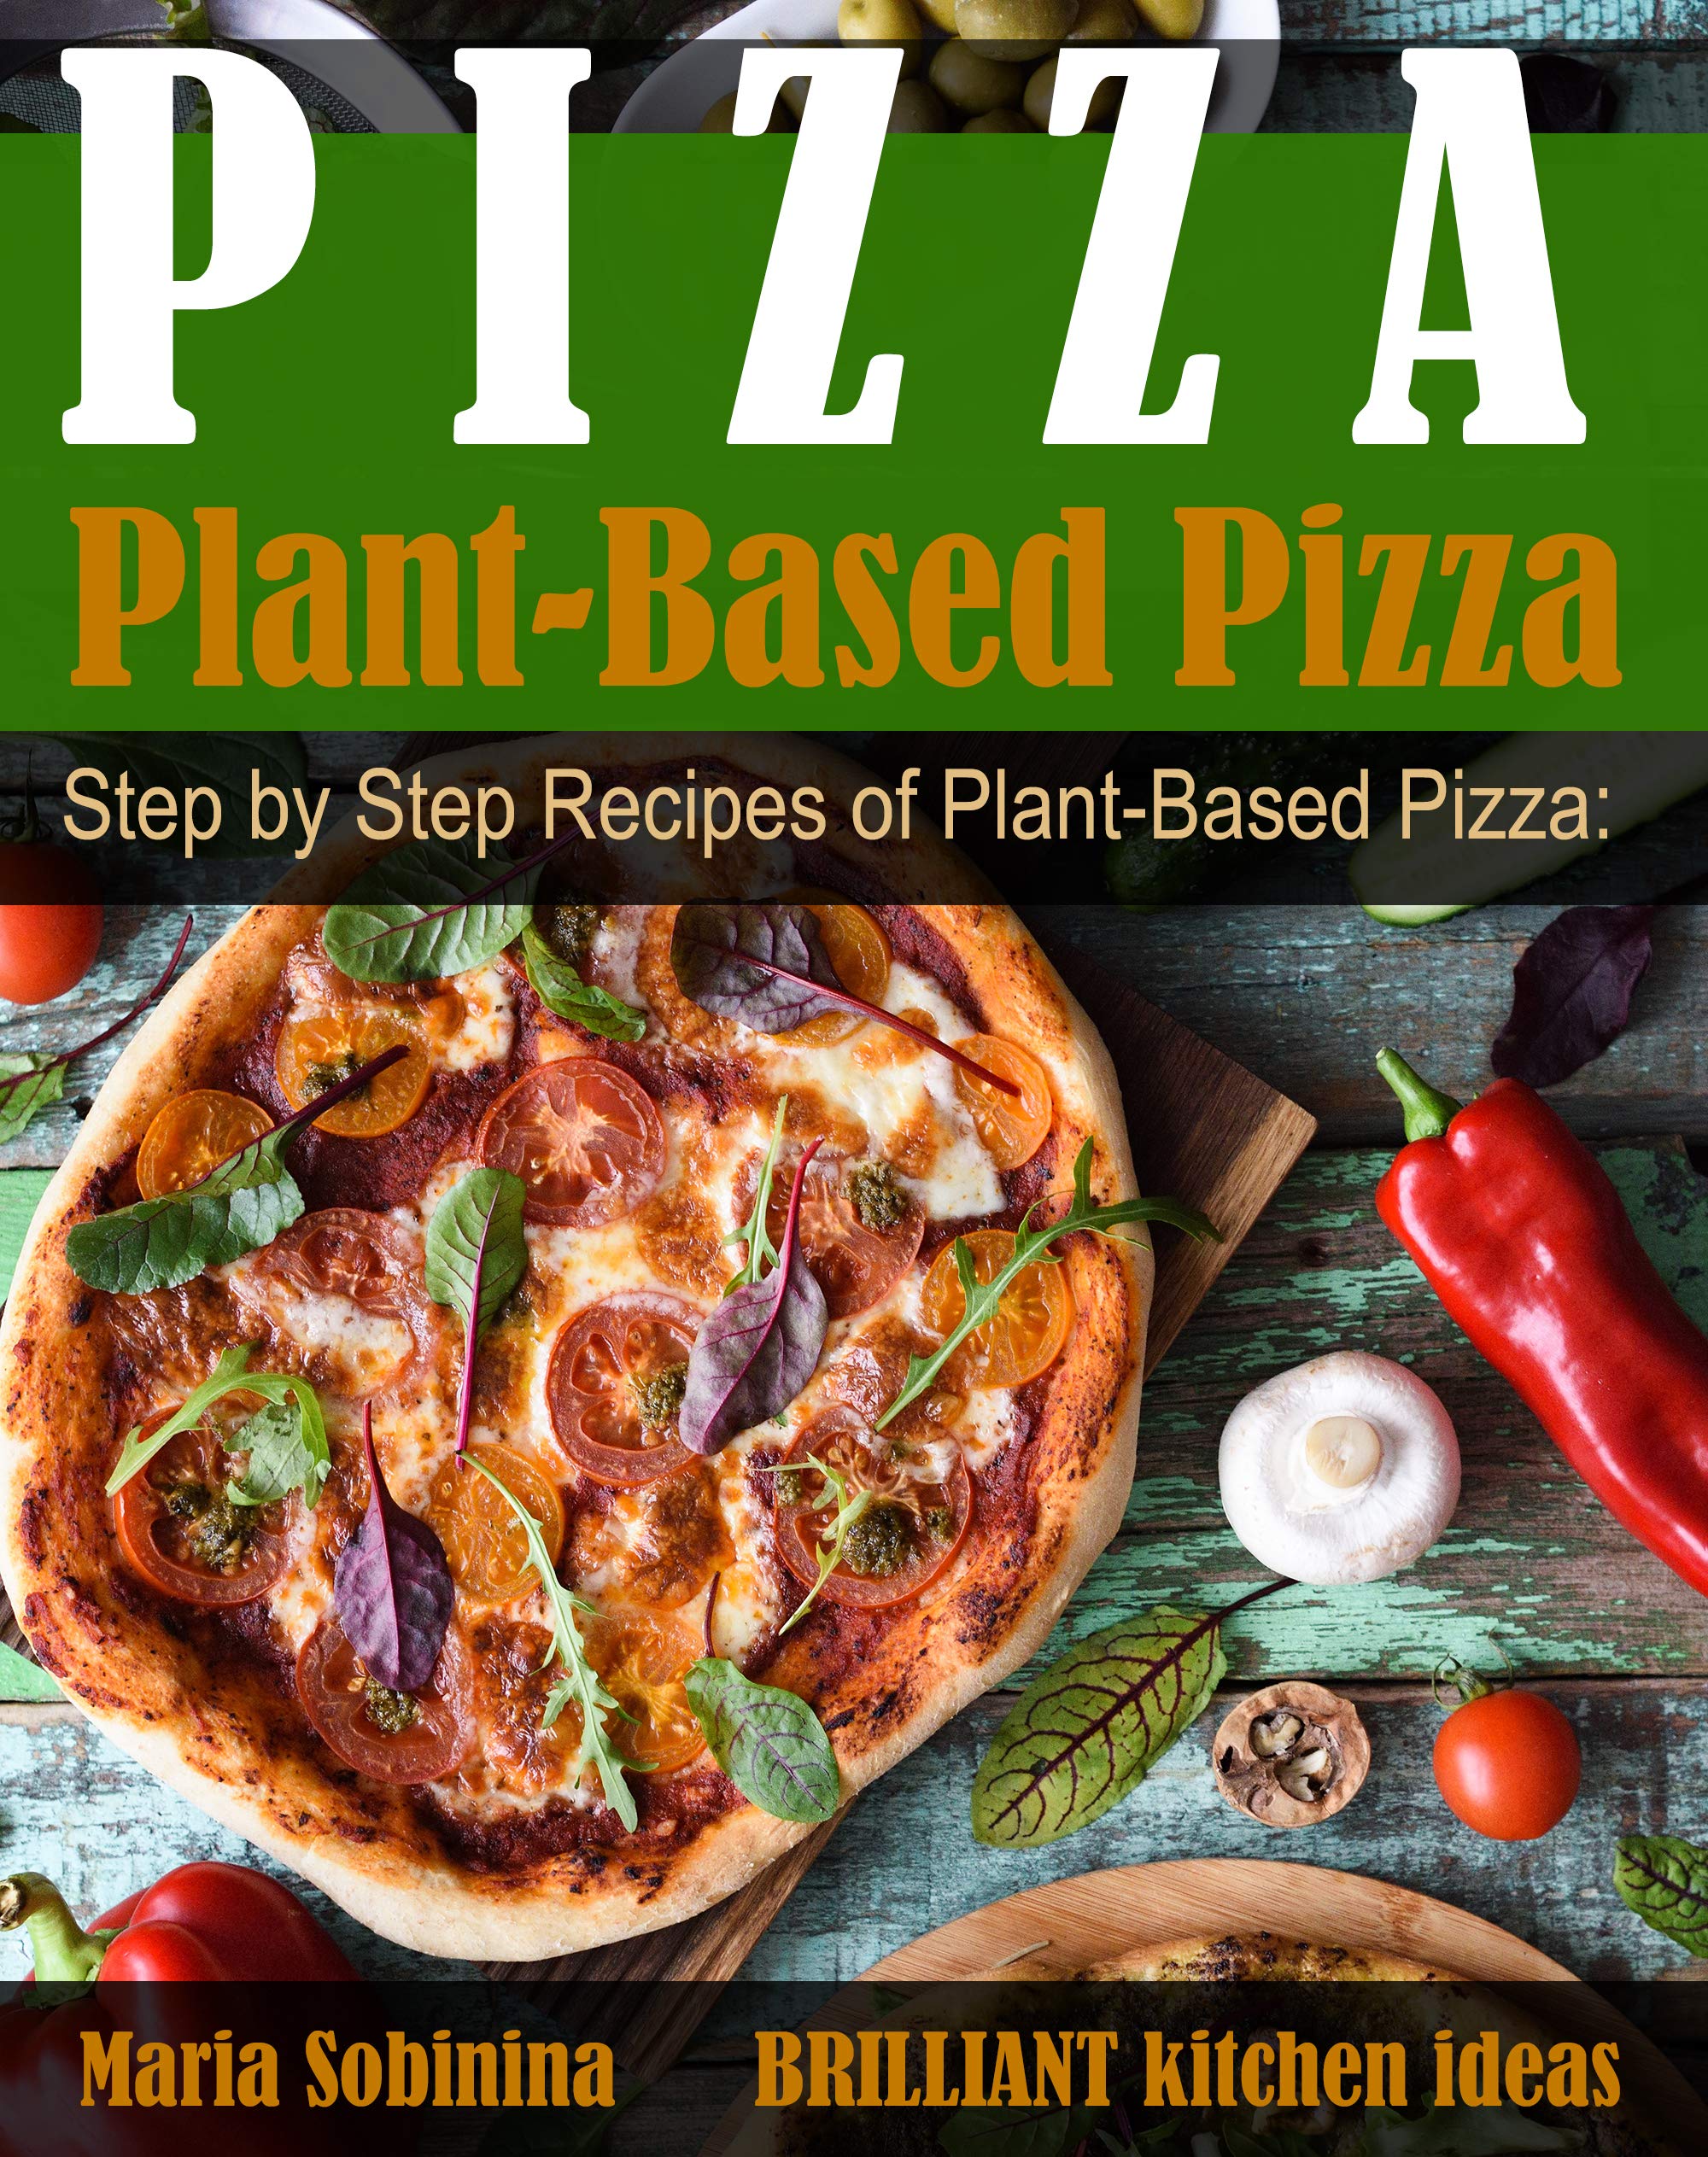 Plant-Based Pizza: Step by Step Recipes of Plant-Based Pizza. Detox, Lose Weight & Be Healthy. (Plant Based Cookbook Book 1)